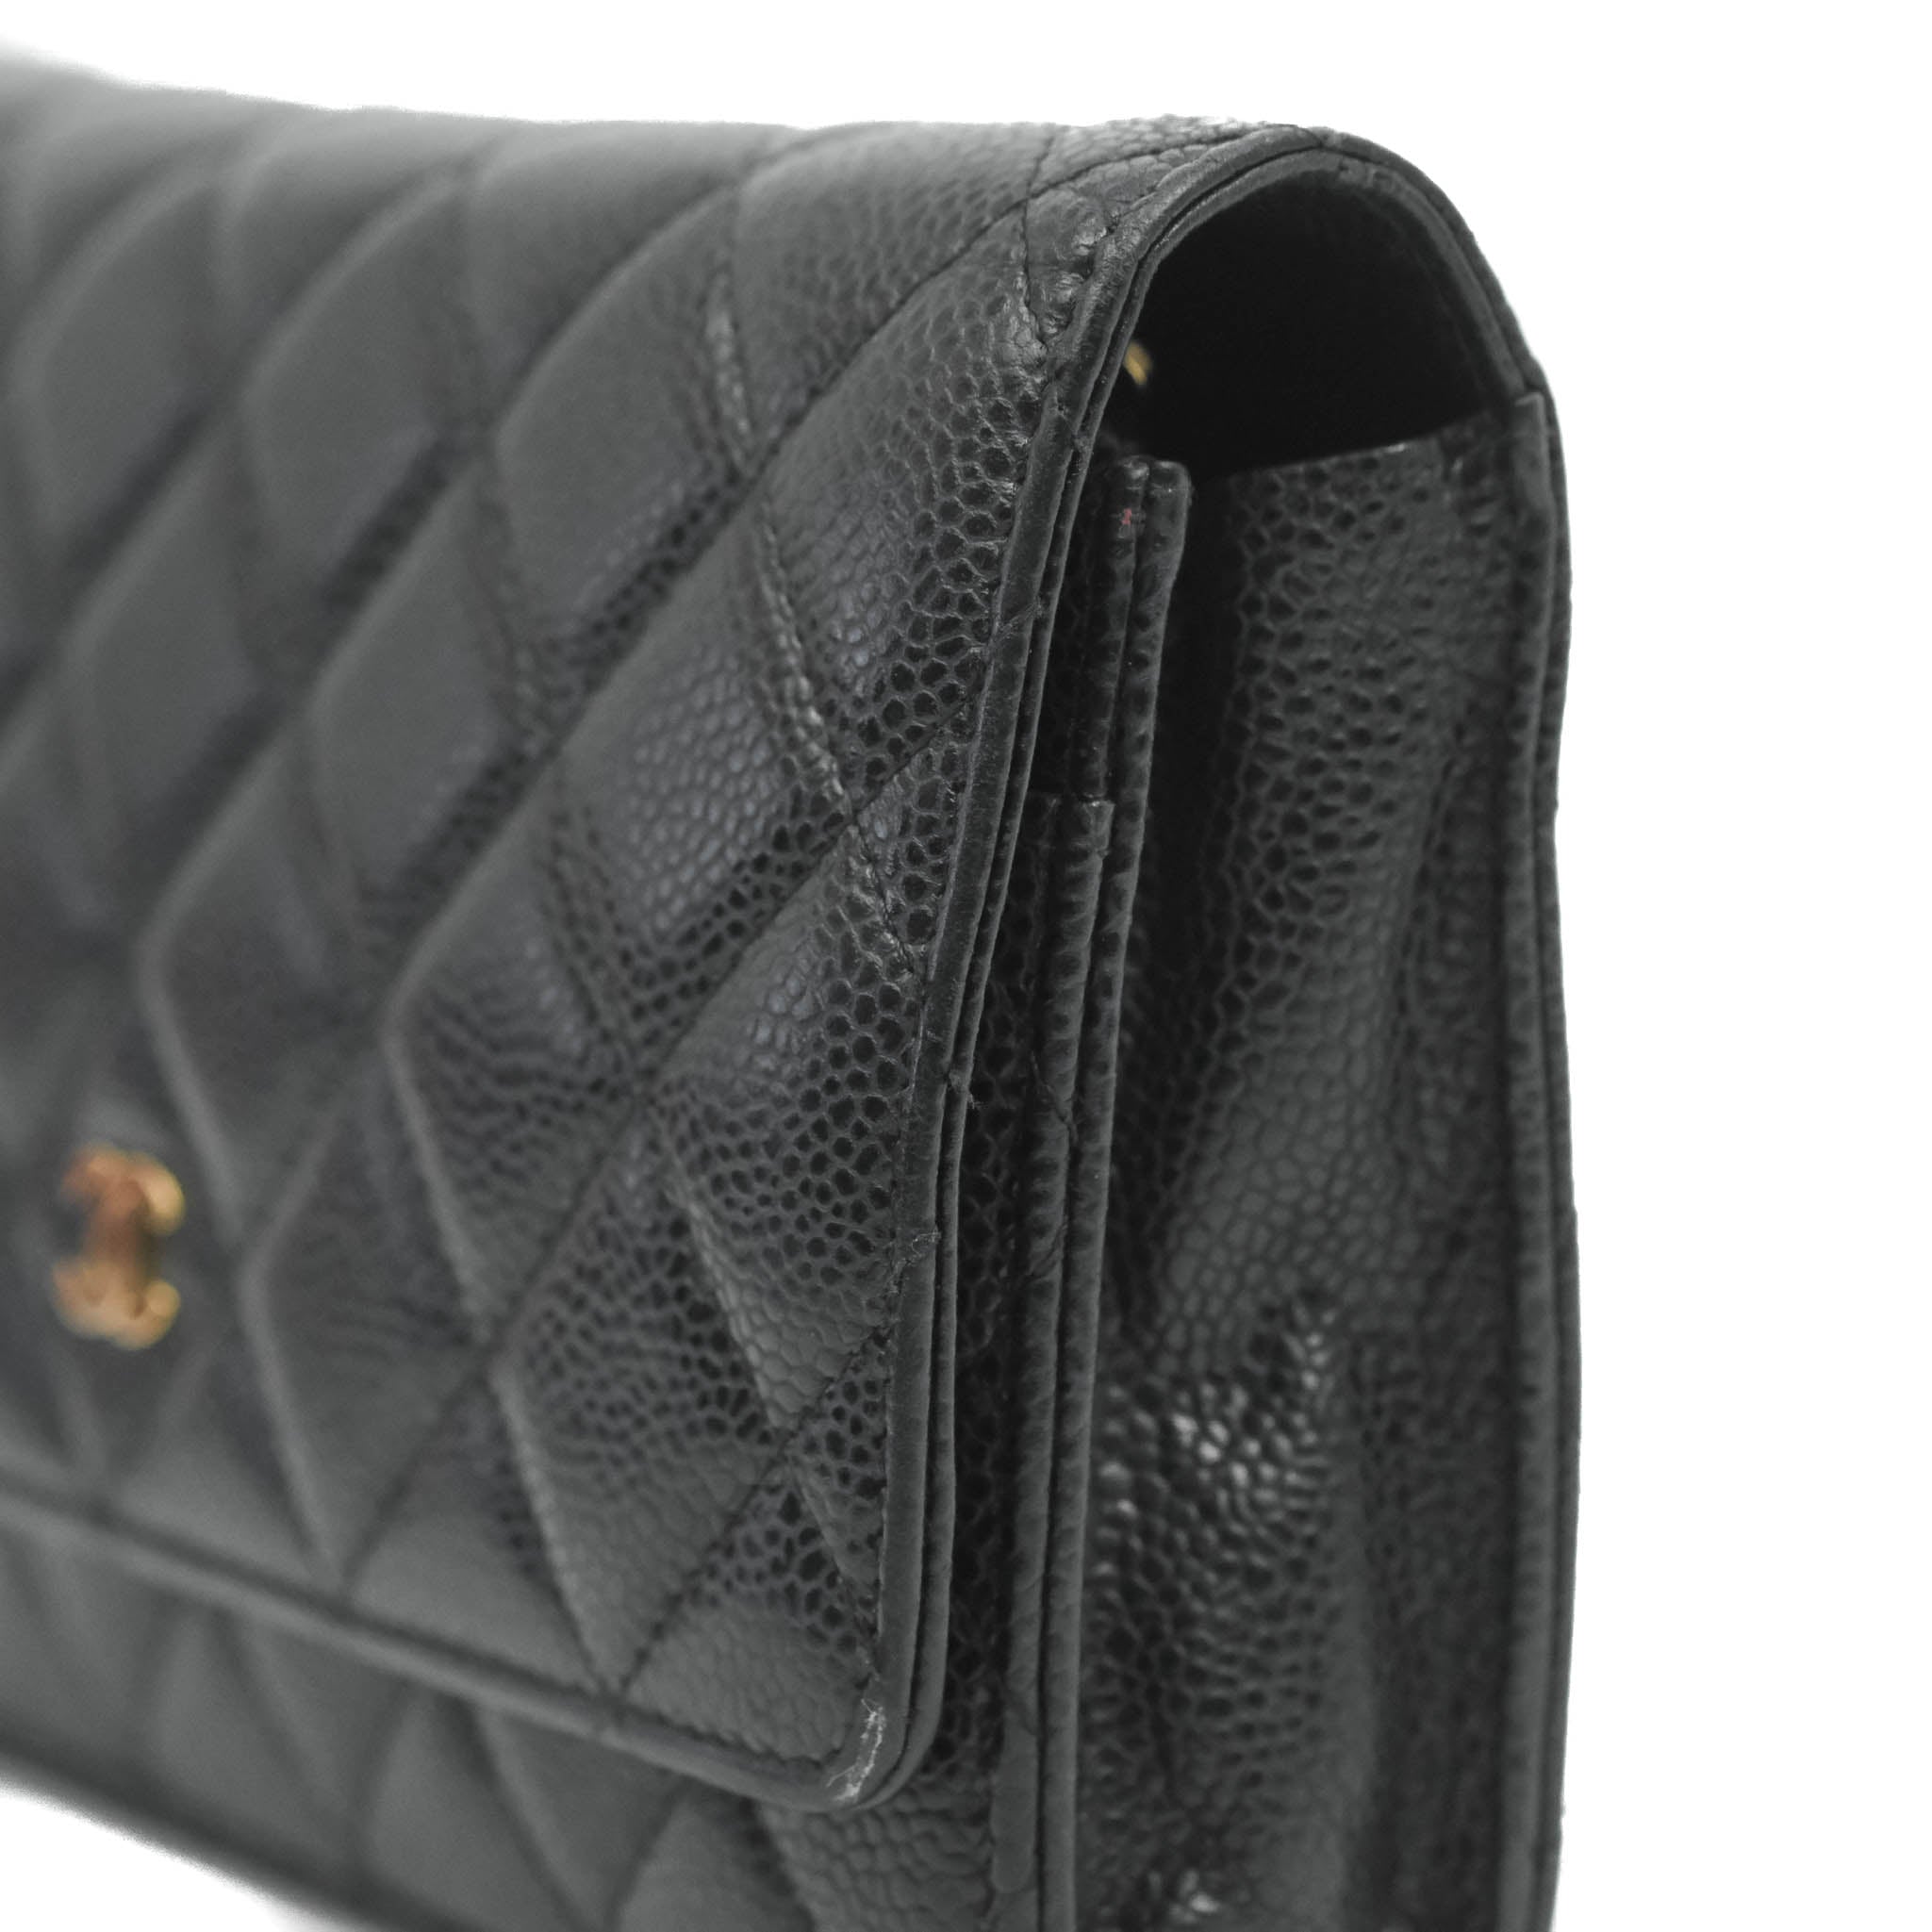 CHANEL Caviar Quilted Wallet on Chain WOC Black 1302366